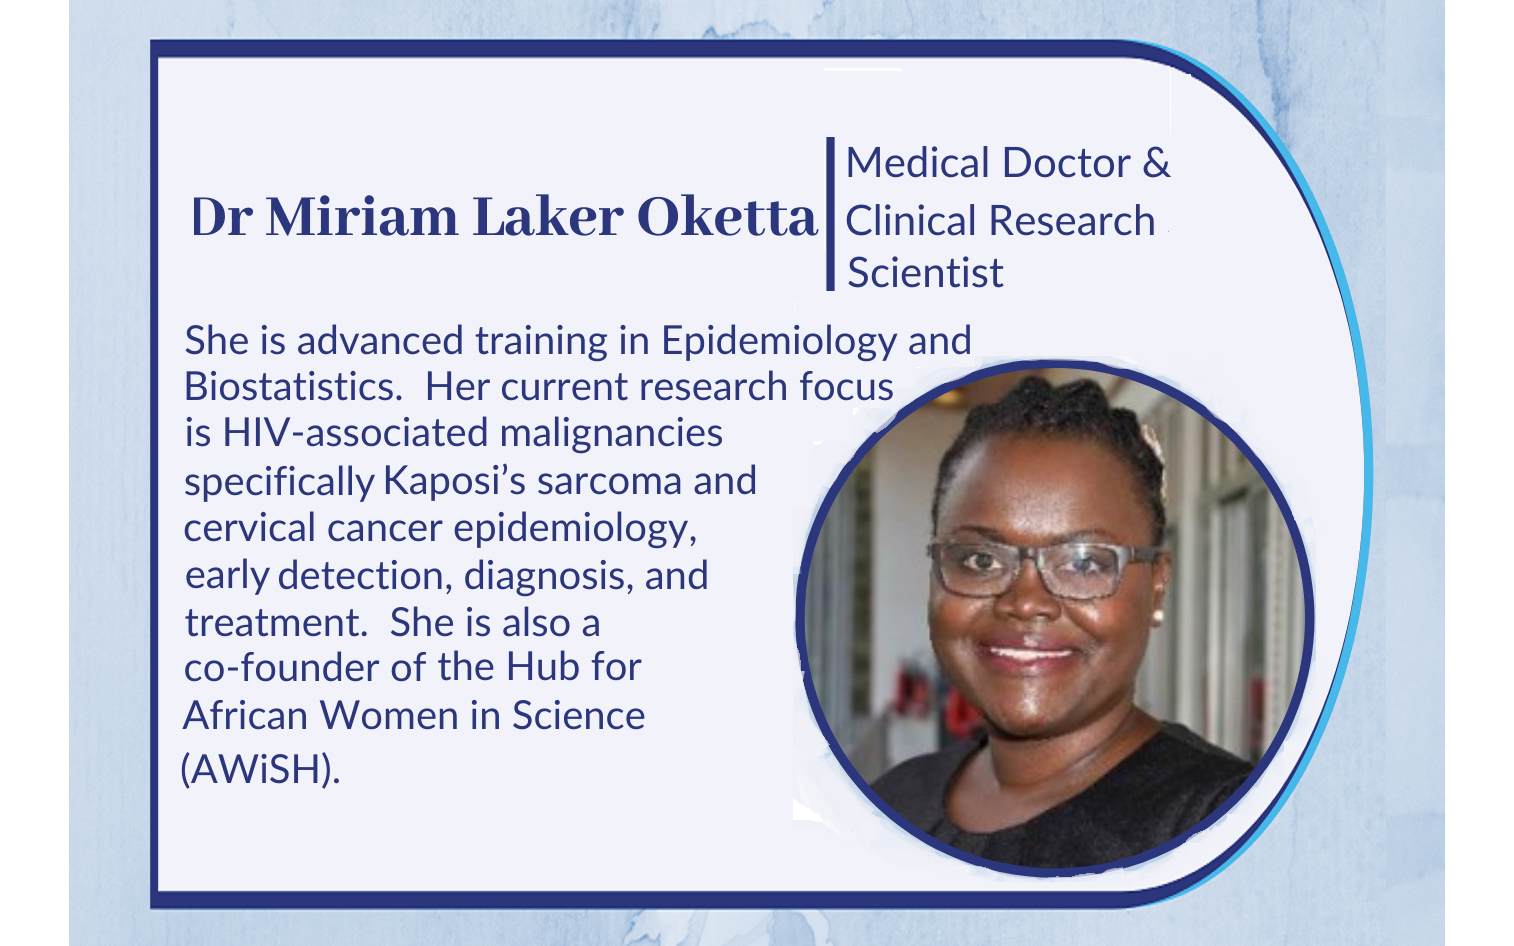 Dr. Miriam Laker-Oketta, Medical Doctor and Clinical Research Scientist at the Infectious Diseases Institute (IDI), Makerere University is the first fellow from East and Central Africa to be awarded the IWF Prestigious Fellowship.